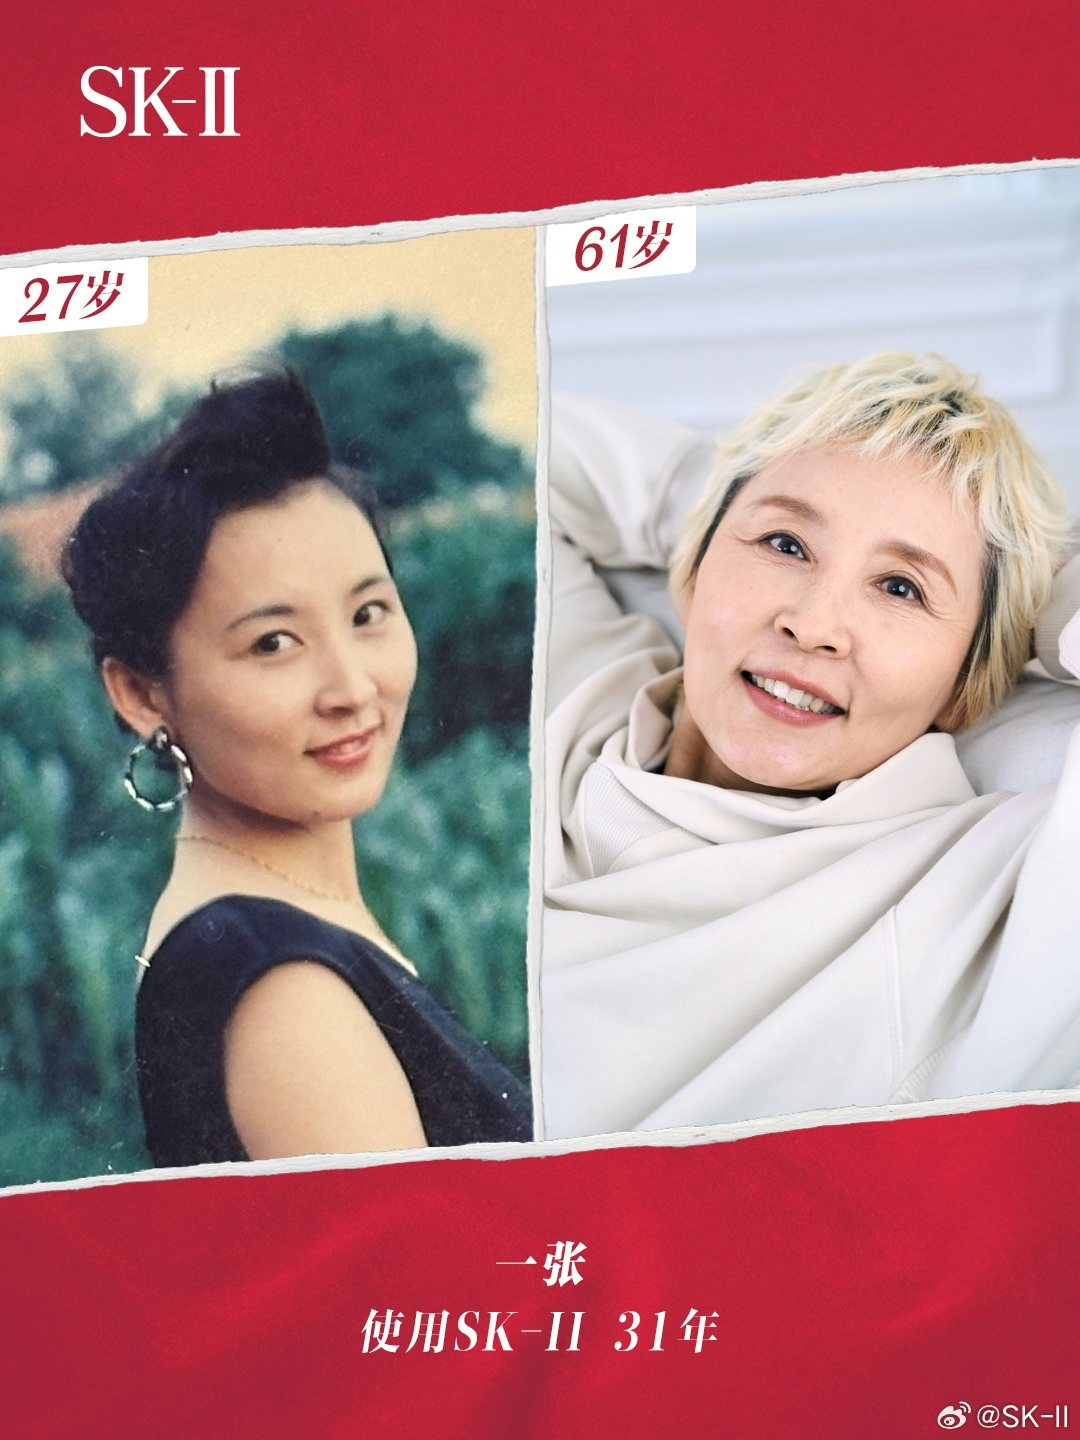 SK-II shares the story of five women embracing their true selves. Photo: SK-II